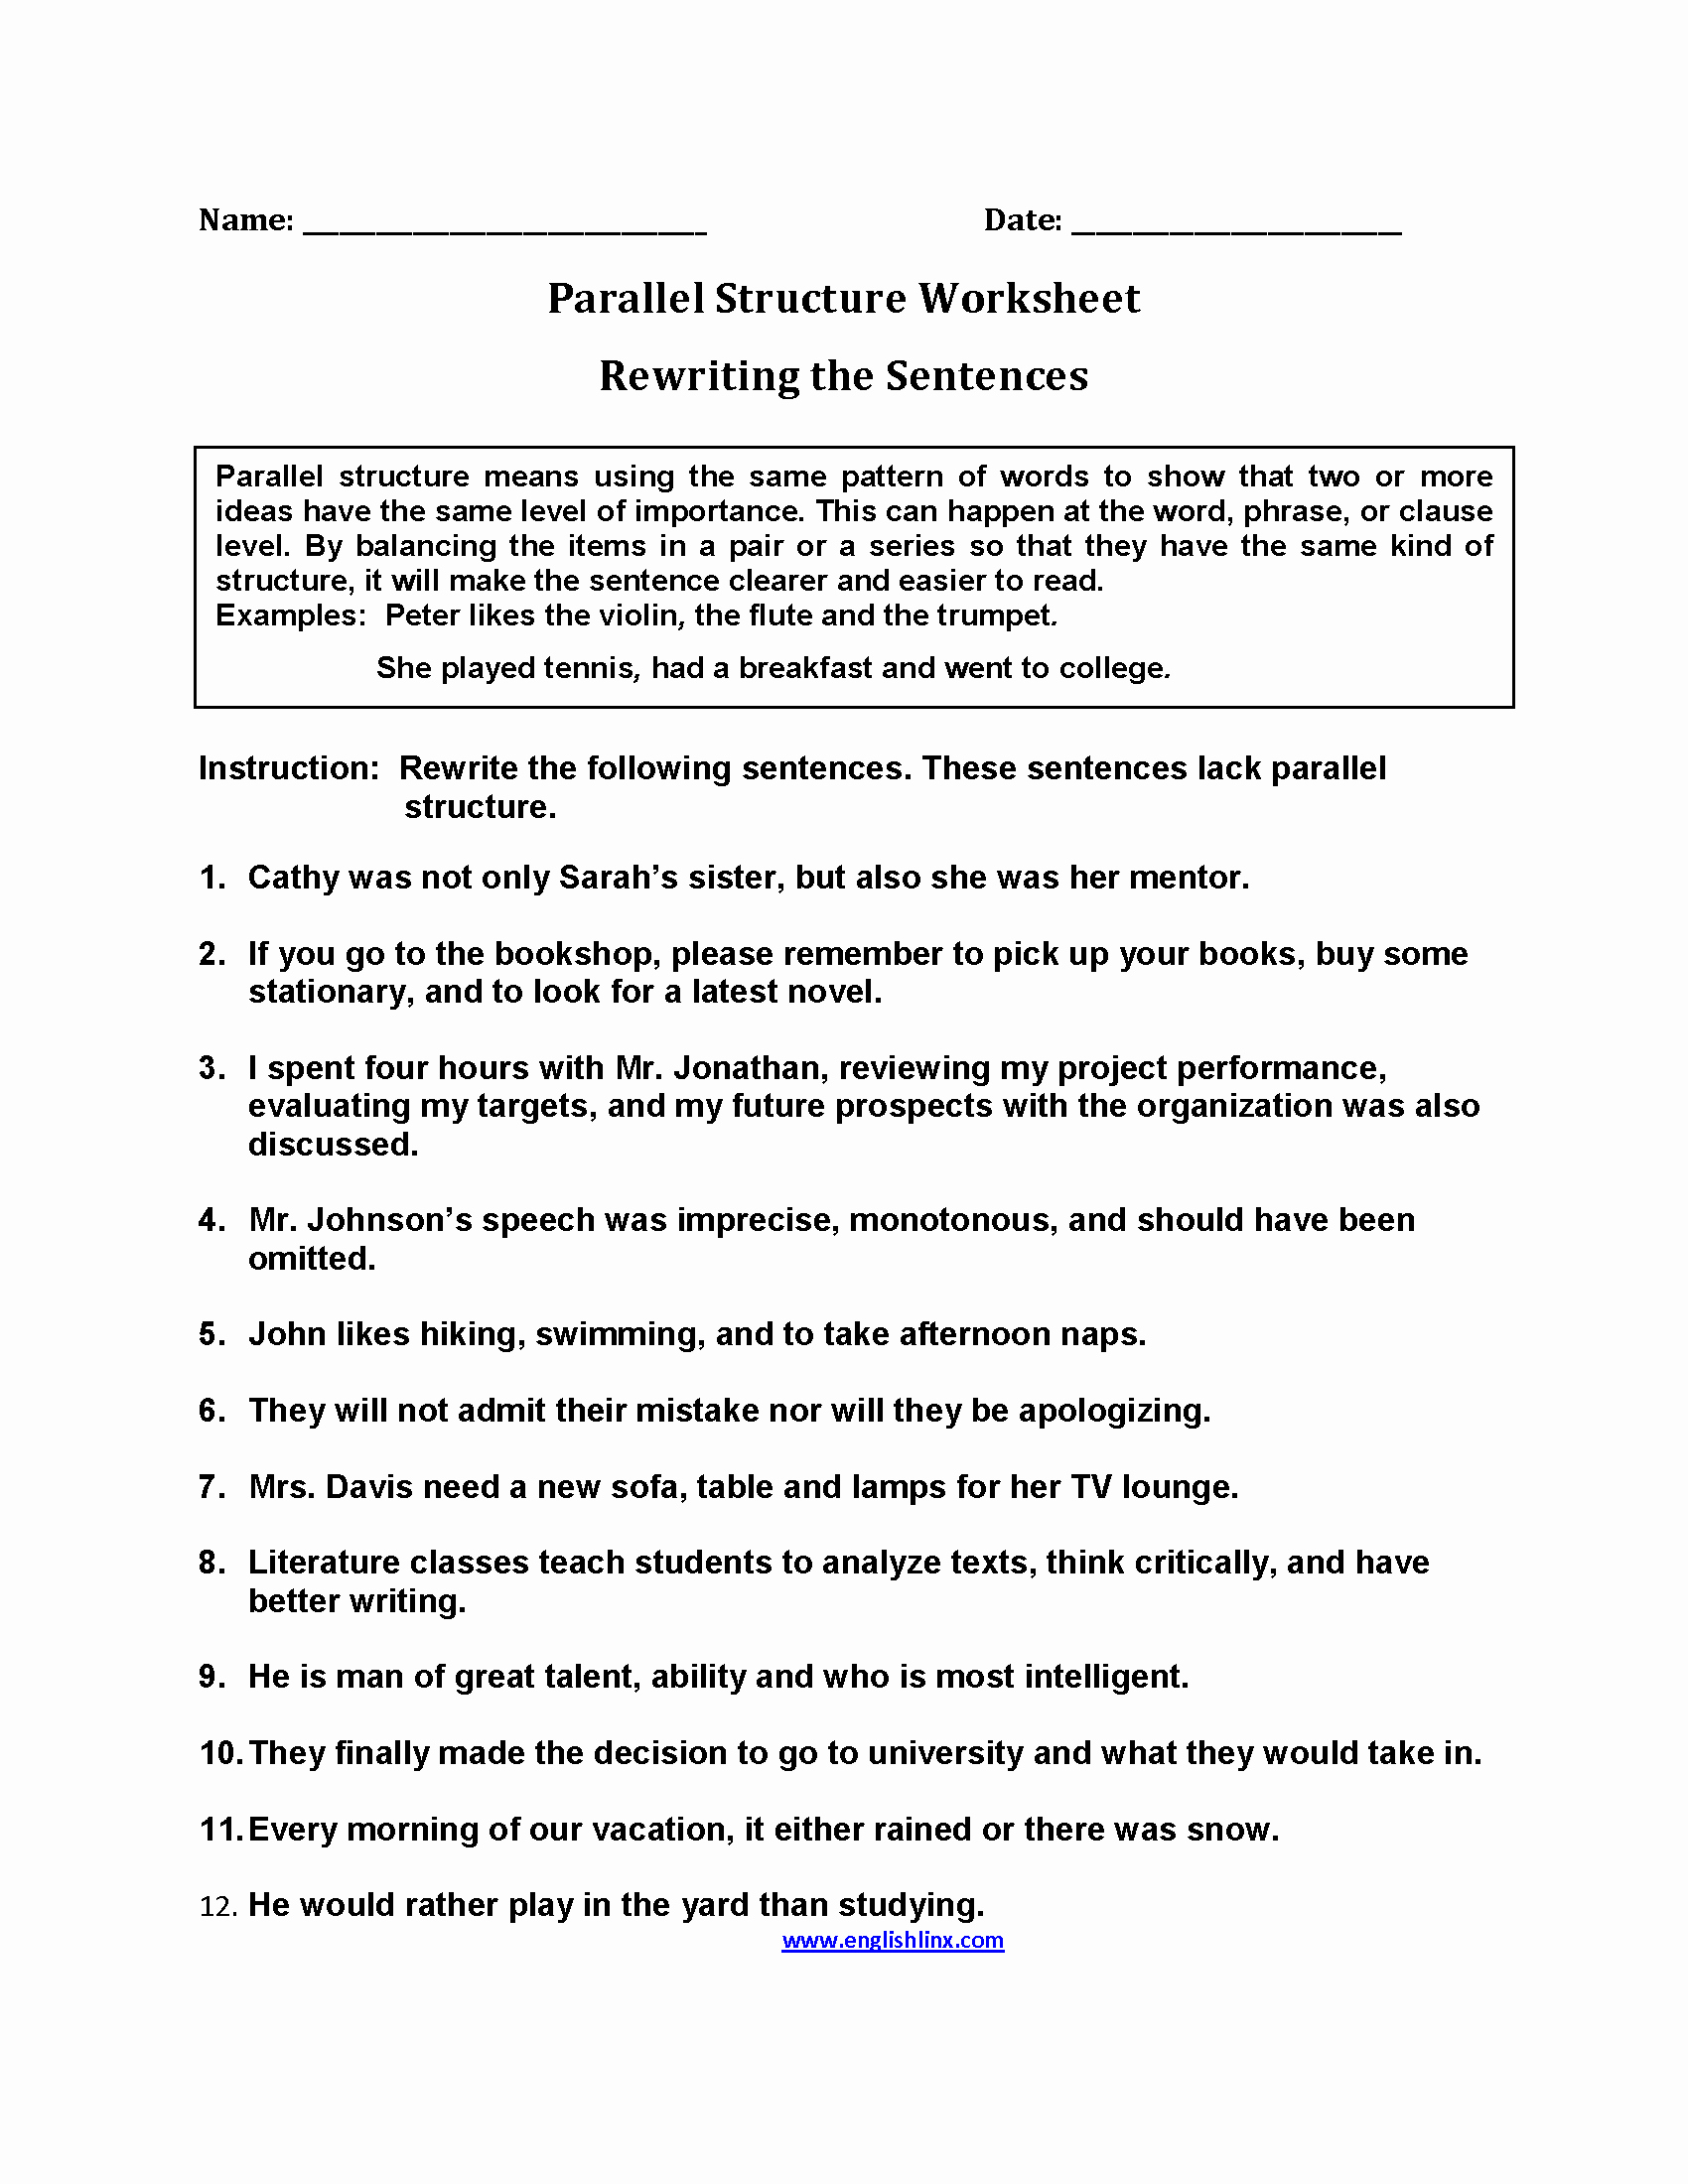 Parallel Structure Worksheet with Answers Elegant Rewriting Sentences Parallel Structure Worksheets